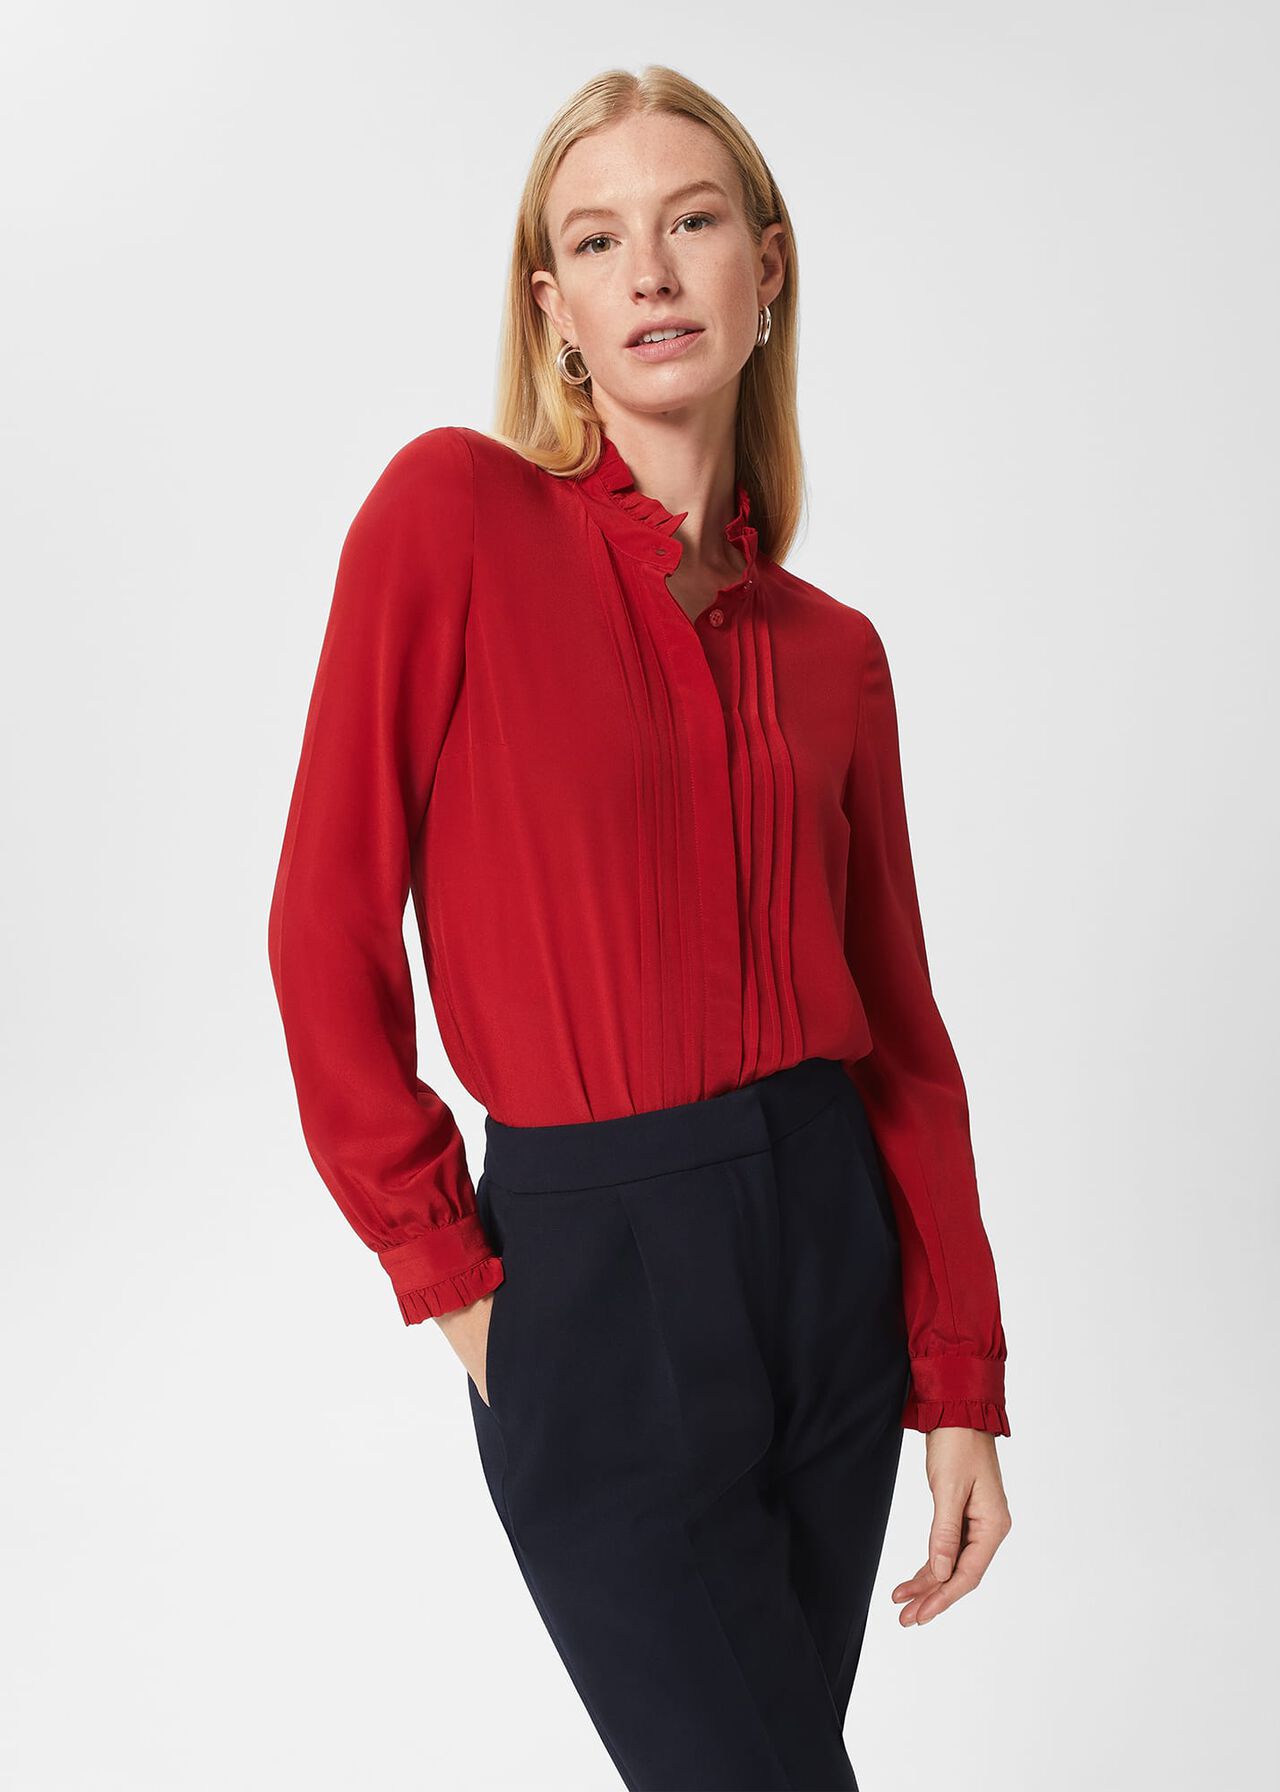 Gracie Silk Frill Blouse, Red, hi-res